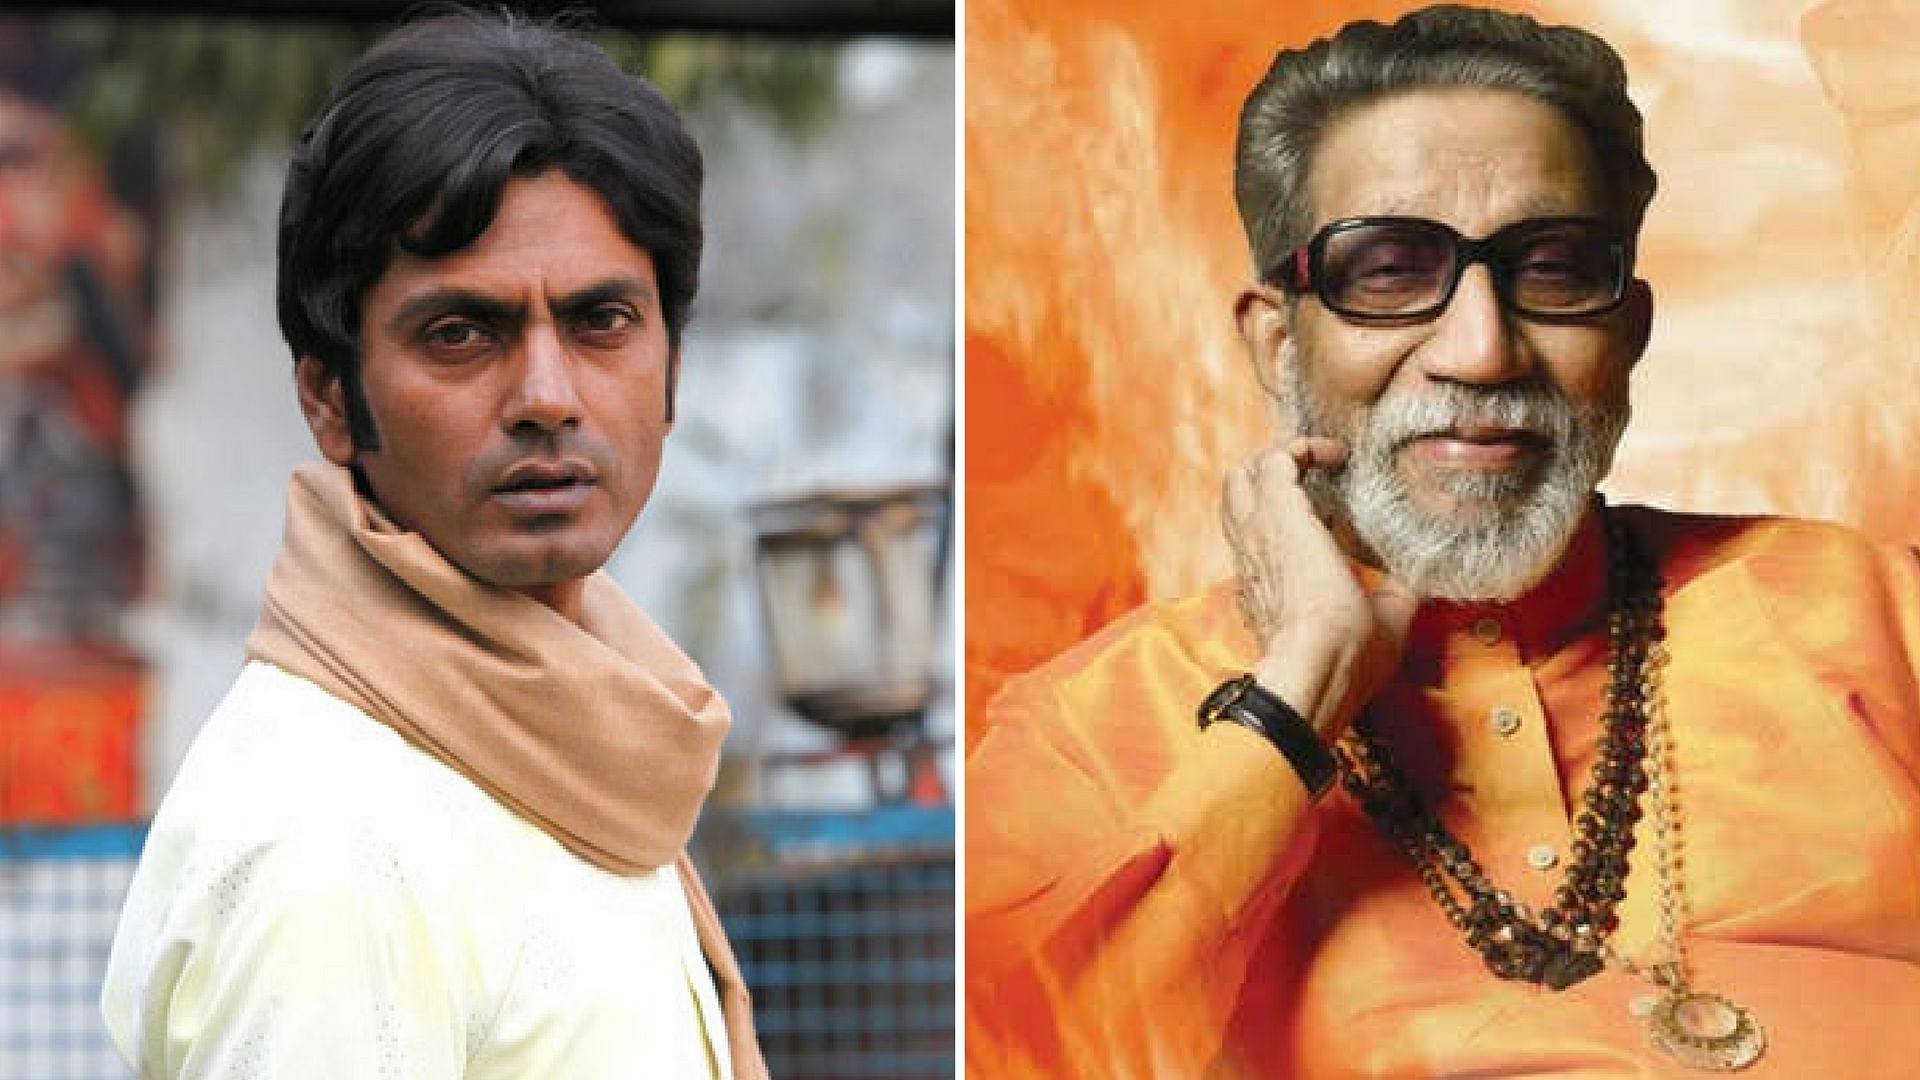 Nawazuddin Siddiqui is reportedly going to play the role of Balasaheb Thackeray.&nbsp;